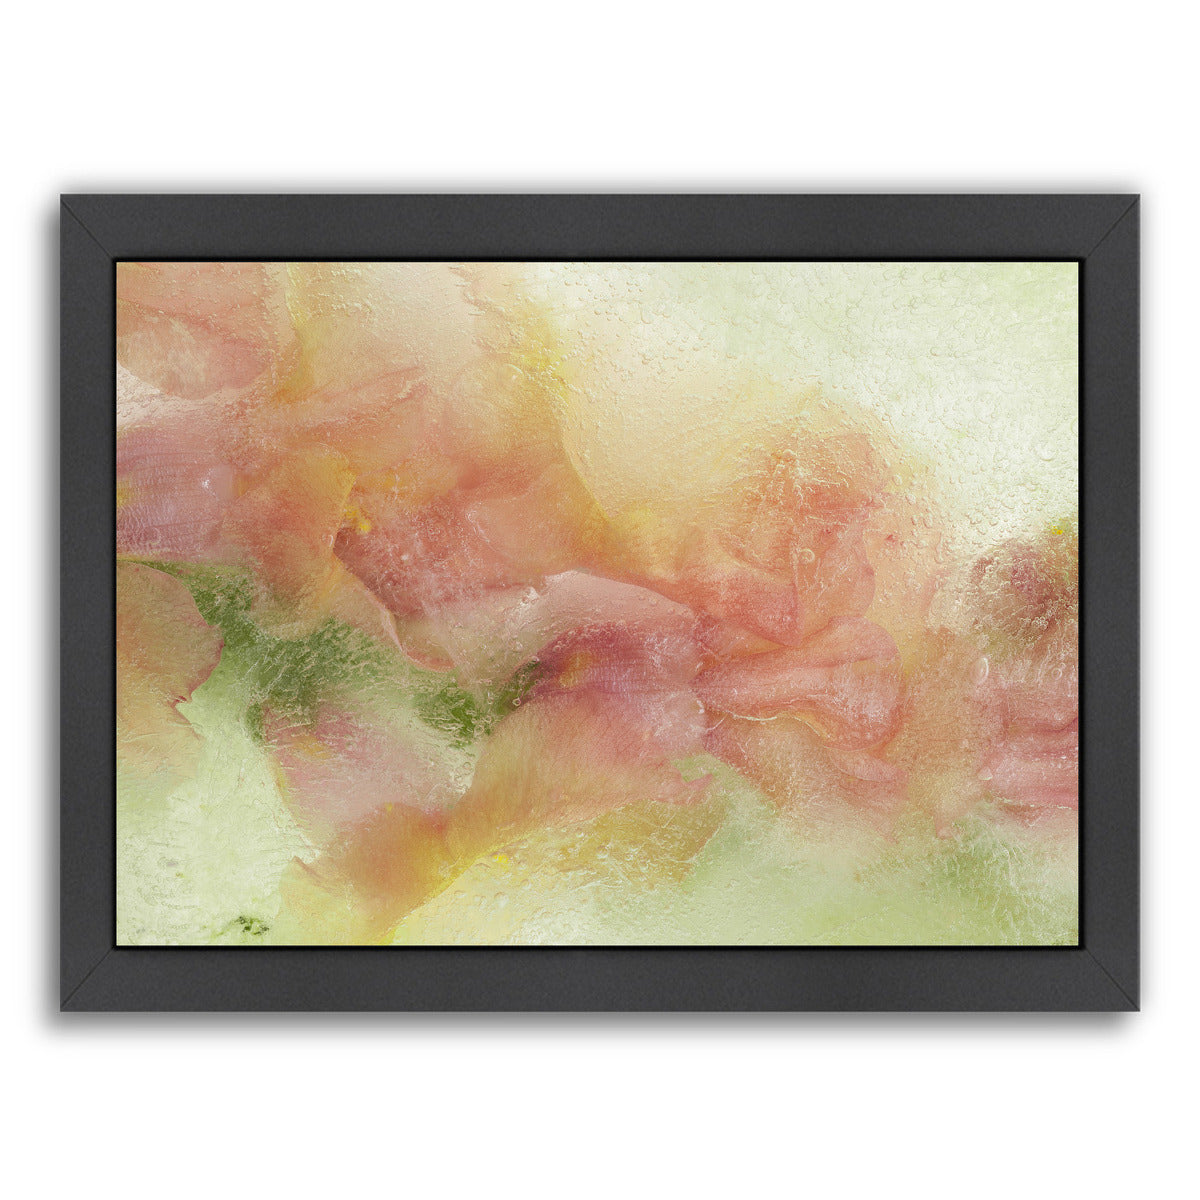 Waterfall In Paradise 2 by Zina Zinchik Framed Print - Americanflat